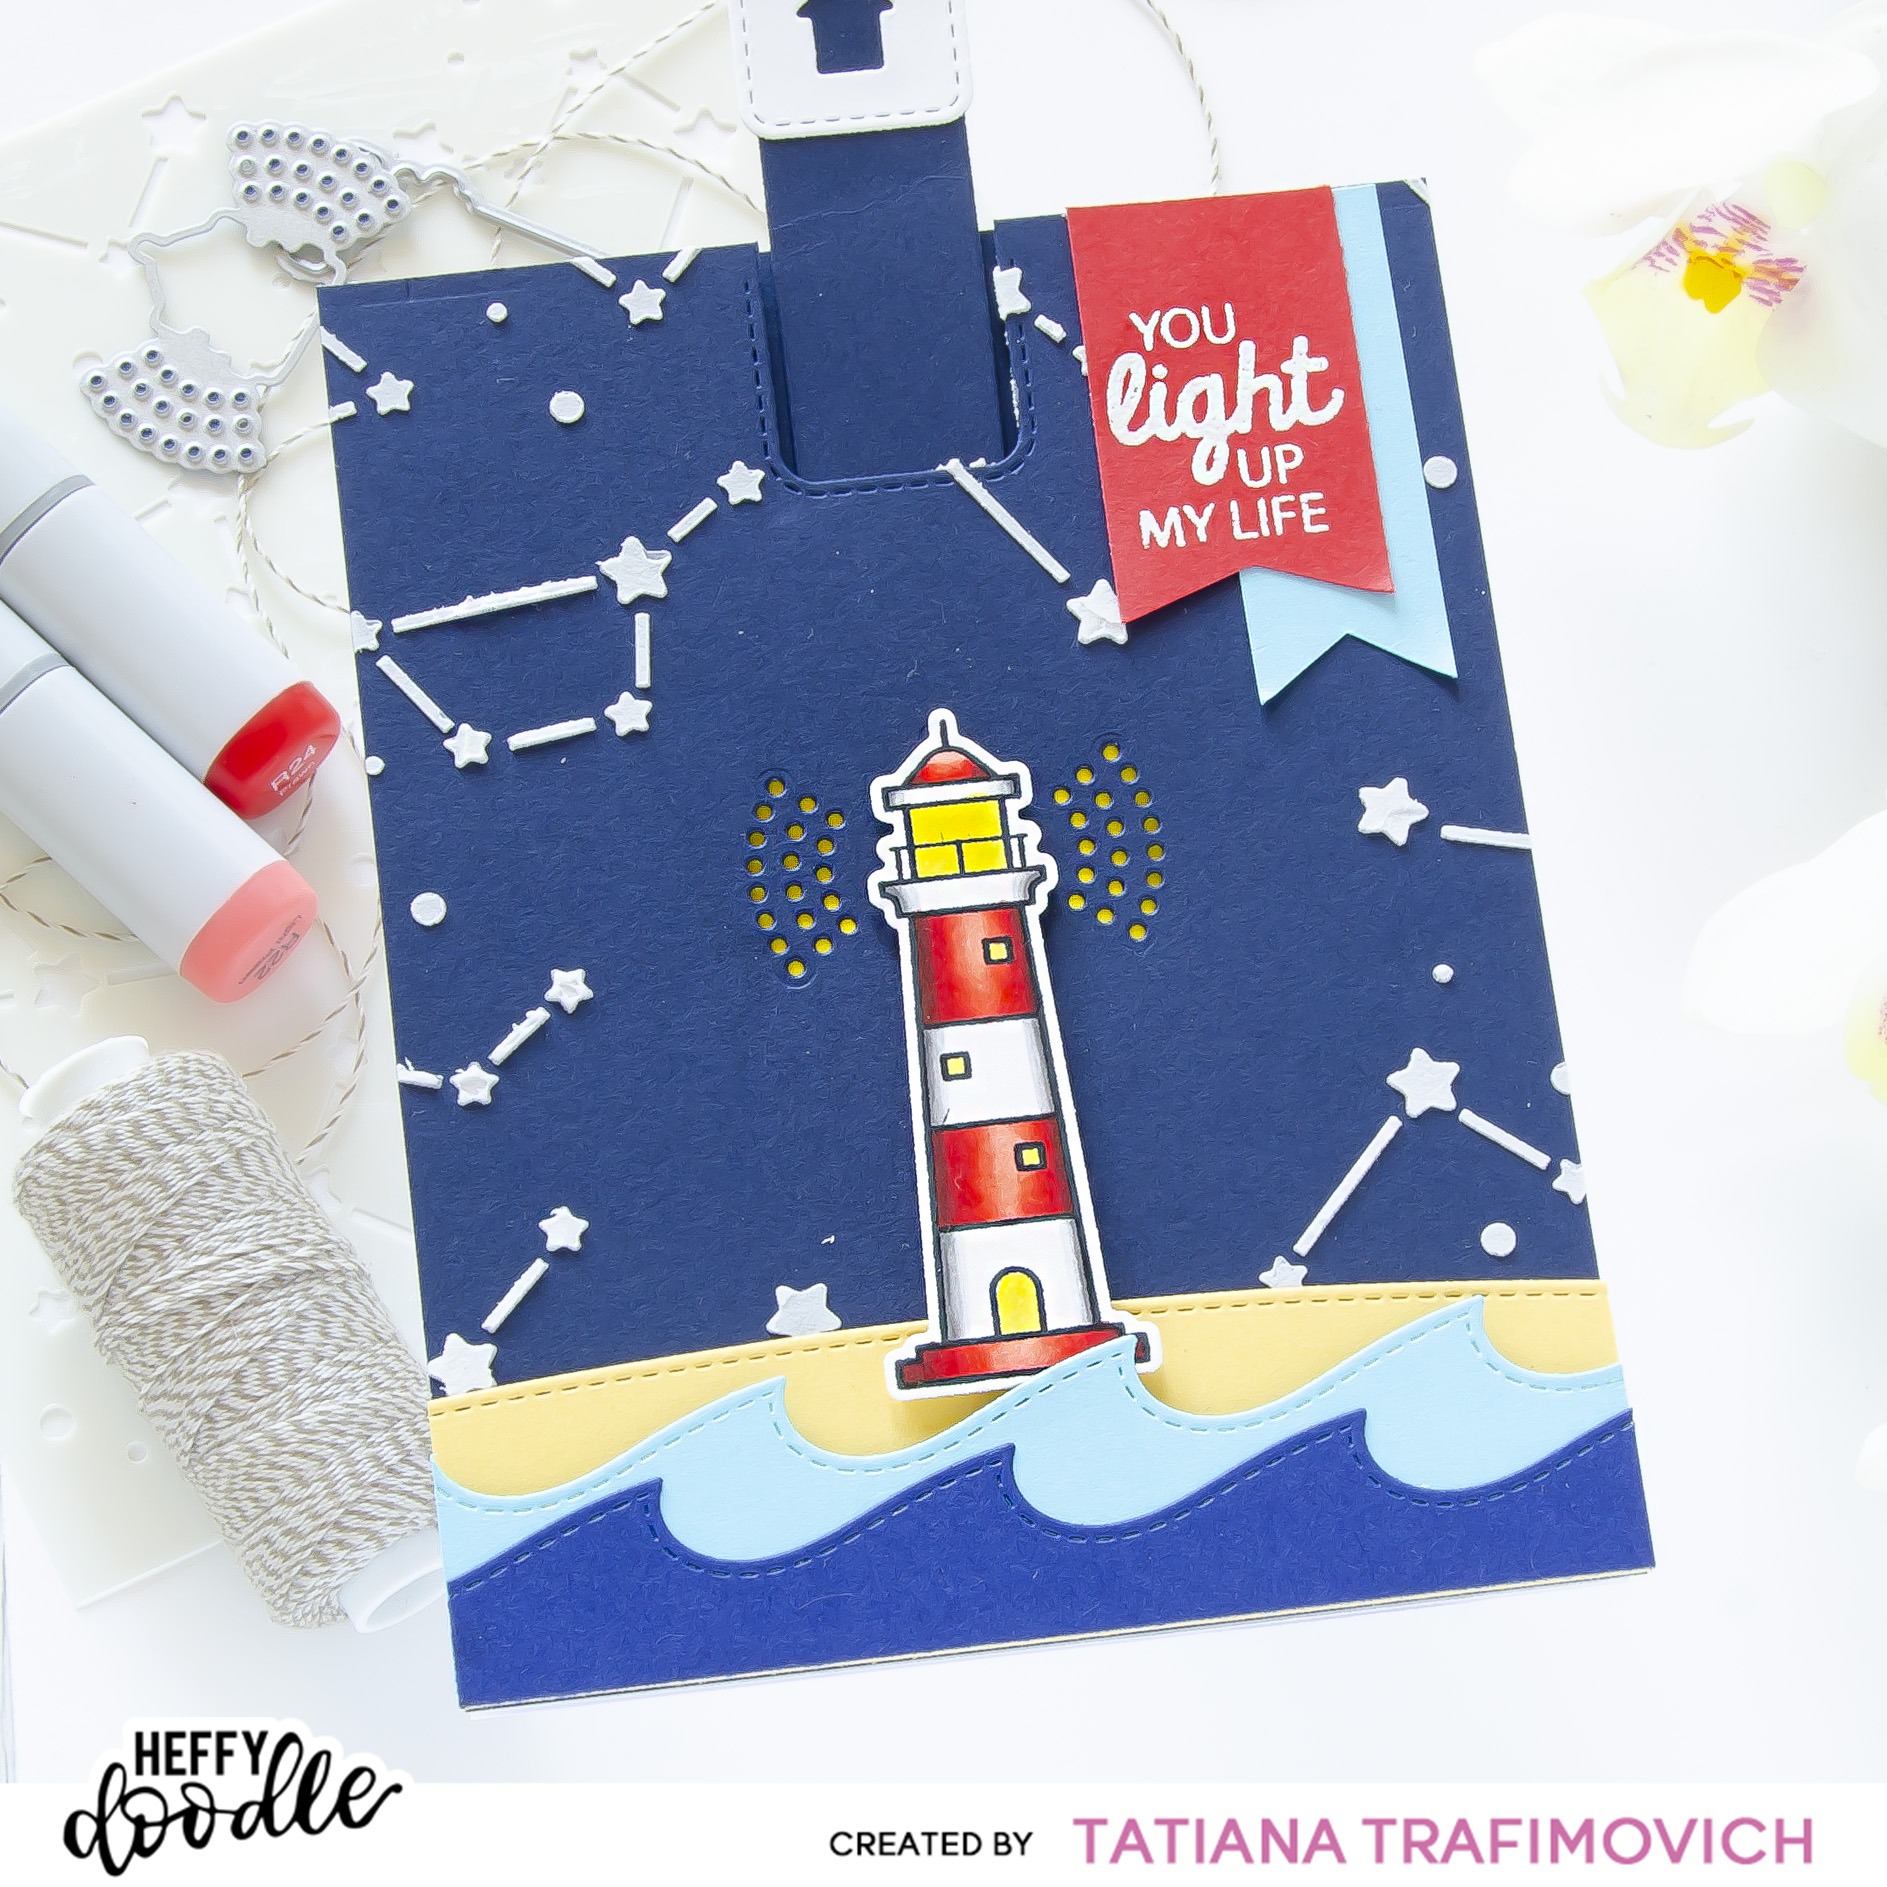 Interactive Light Up Card #handmade card by Tatiana Trafimovich #tatianacraftandart #tatianagraphicdesign - stamps and dies by Heffy Doodle #heffydoodle